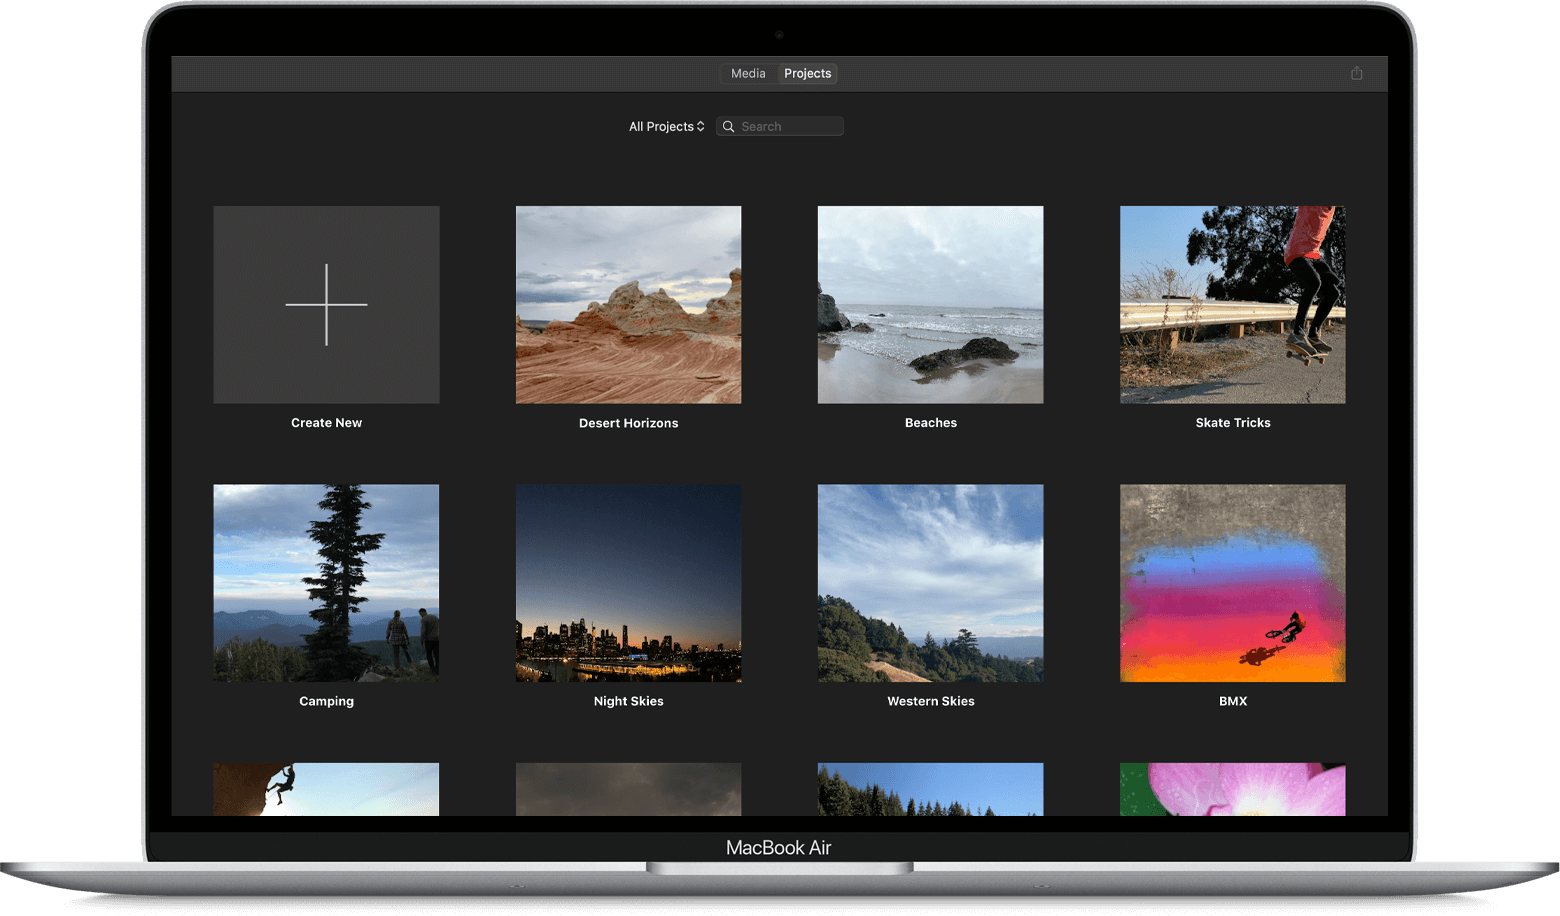 macos-mba-imovie-10-2-new-project